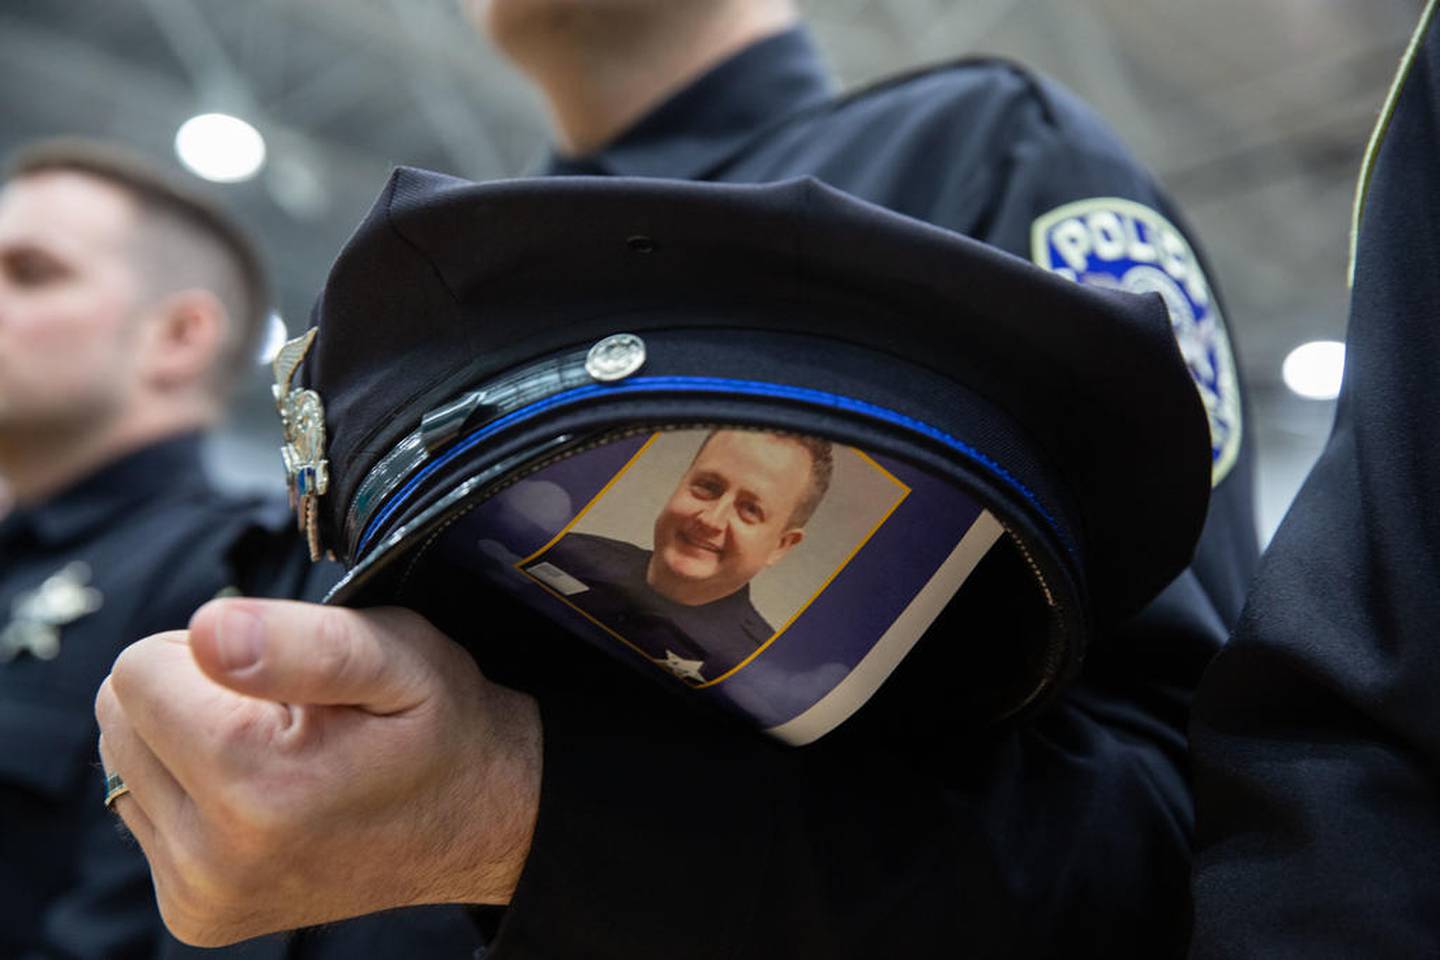 A program is tucked inside an officer's hat. Funeral services for McHenry County Sheriff's Deputy Jacob Keltner is held at Woodstock North High School on Wednesday, March 13, 2019.